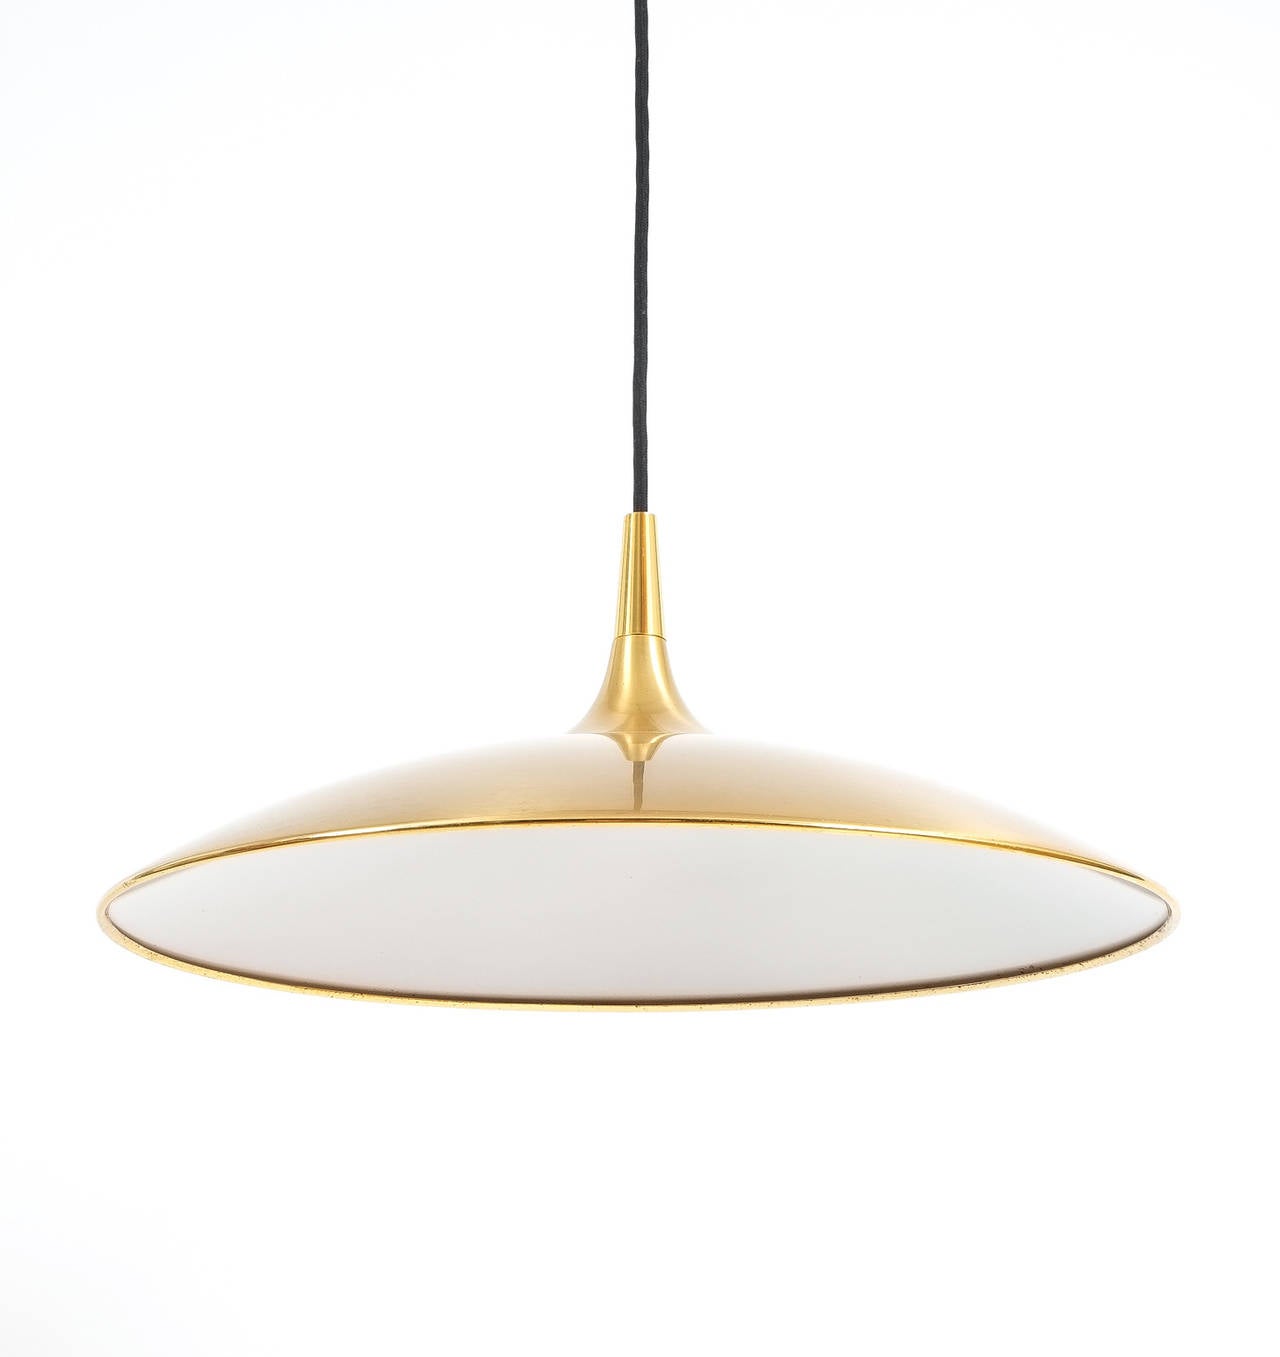 German Polished Brass Pendant by Florian Schulz